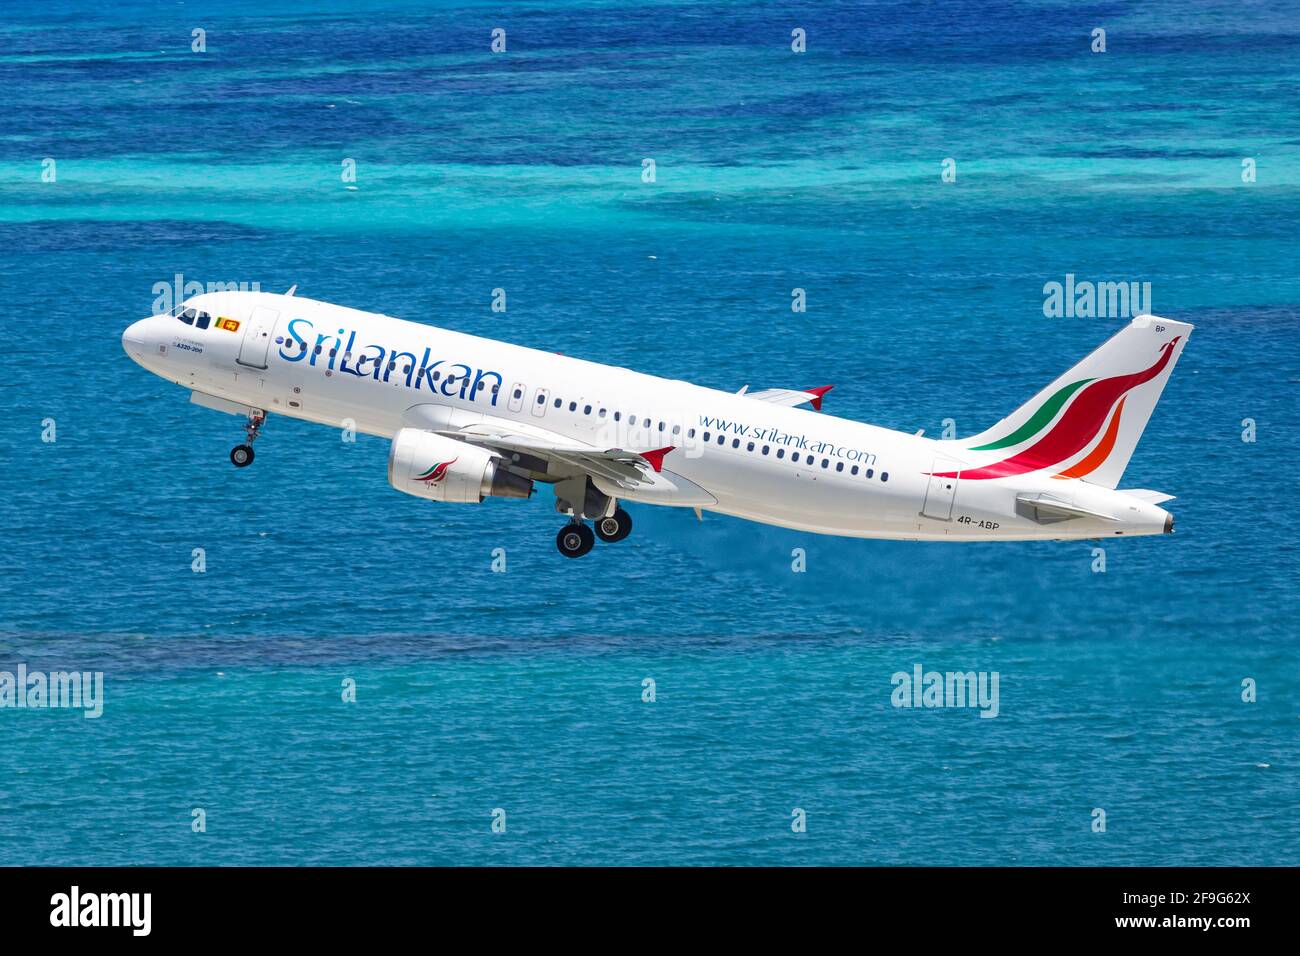 Mahe, Seychelles - November 25, 2017: Sri Lankan Airbus A320 airplane at Seychelles International Airport (SEZ) in the Seychelles. Airbus is a Europea Stock Photo